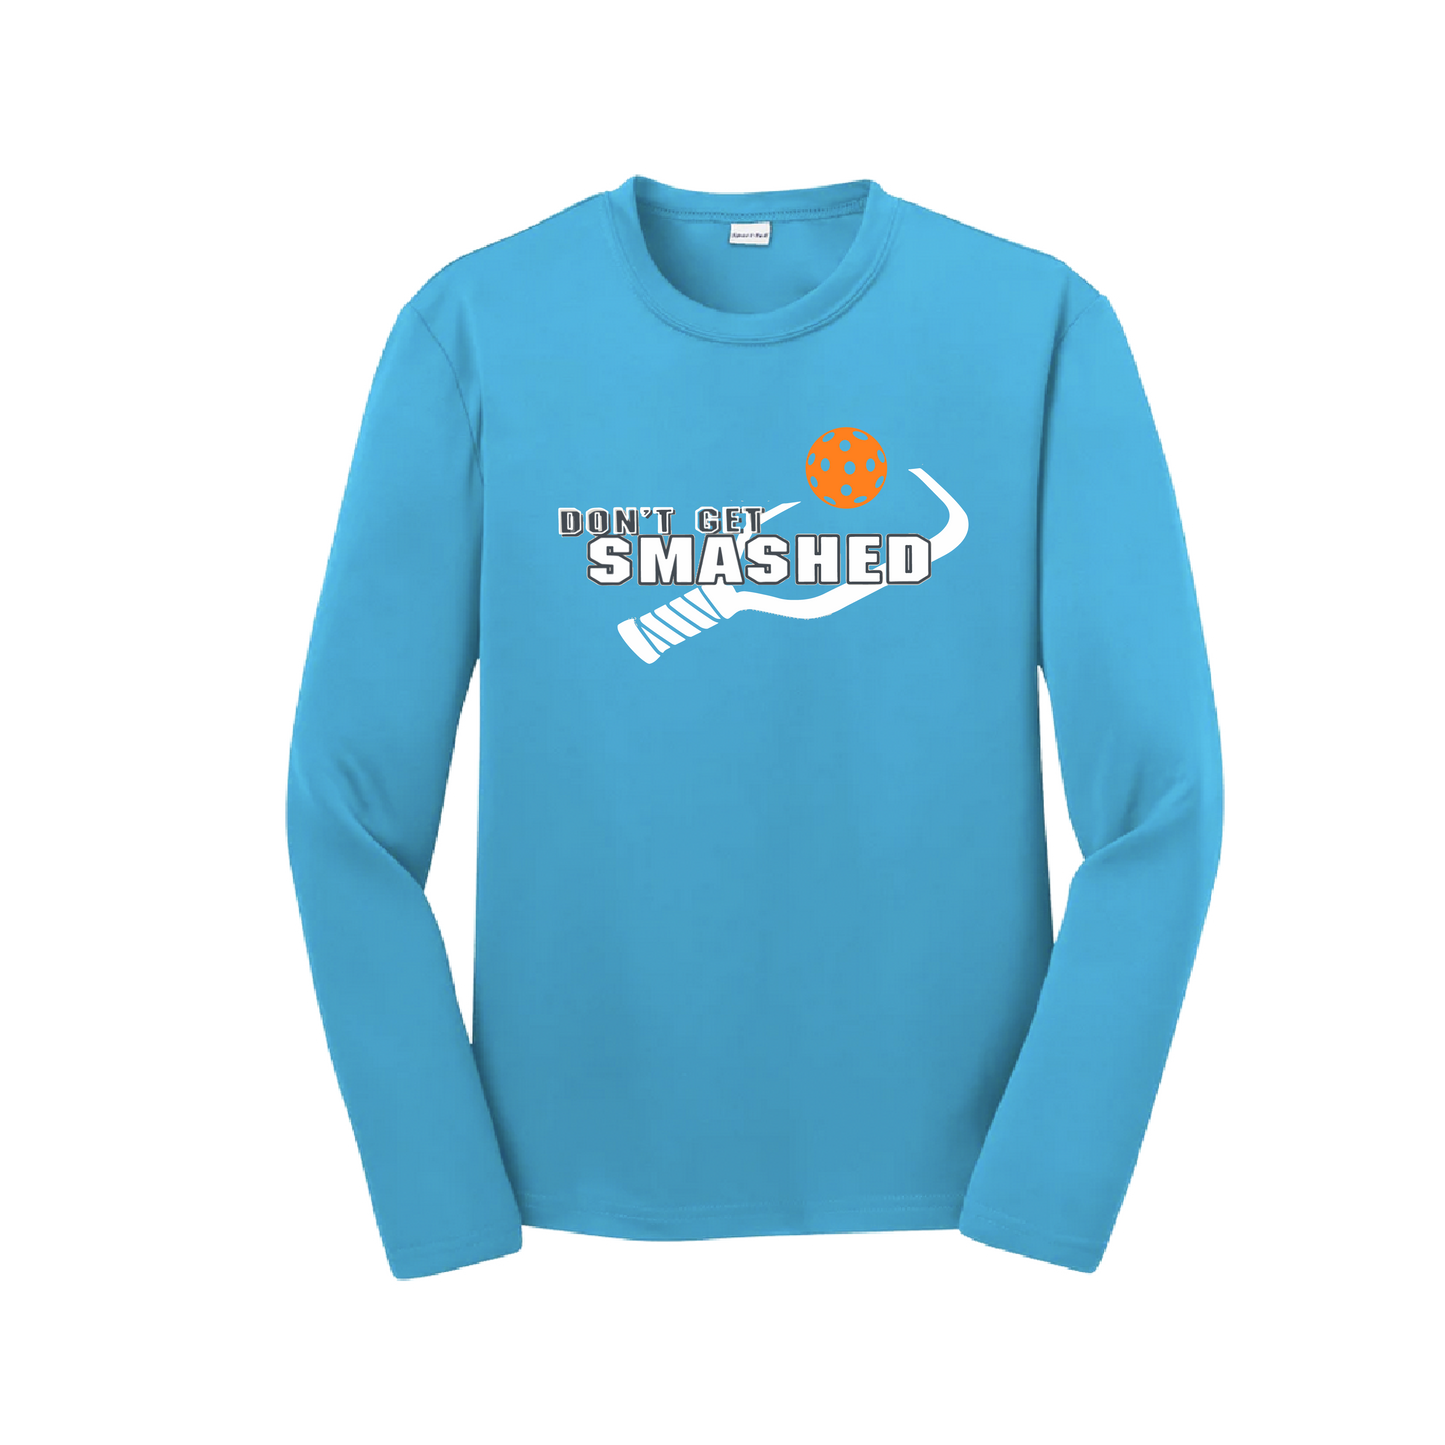 Lightweight, airy, and sweat-wicking, these performance-style shirts keep you cool and comfy. Logo-safe PosiCharge tech ensures these colors—cyan, orange, or pink—will stay as fresh as when you put 'em on. Remove the tag and wear in comfort with set-in sleeves.